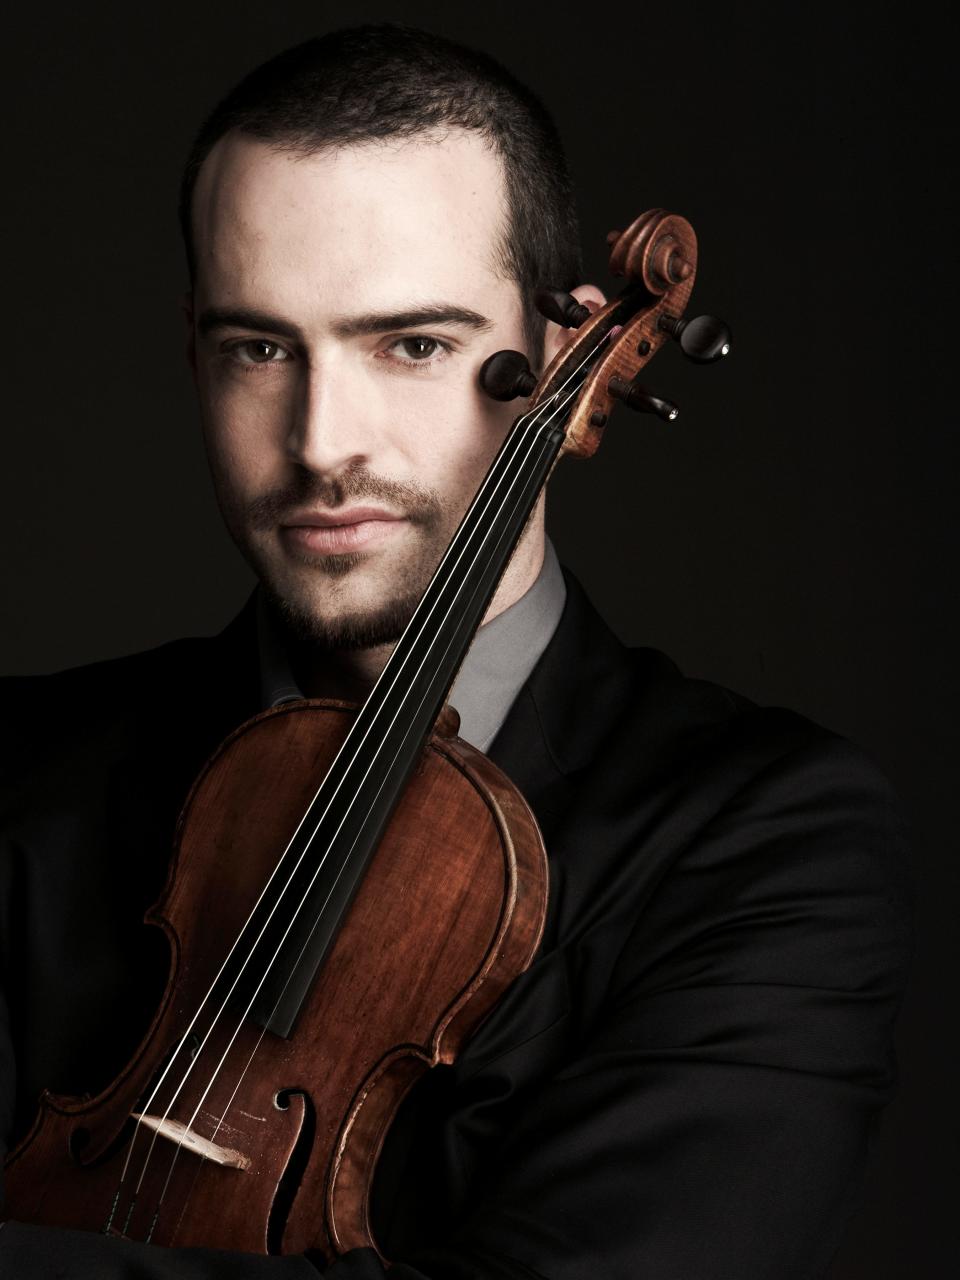 Acclaimed violinist Emil Altschuler will be part of a trio playing classical music Oct. 27 at Highfield Hall & Gardens in Falmouth.